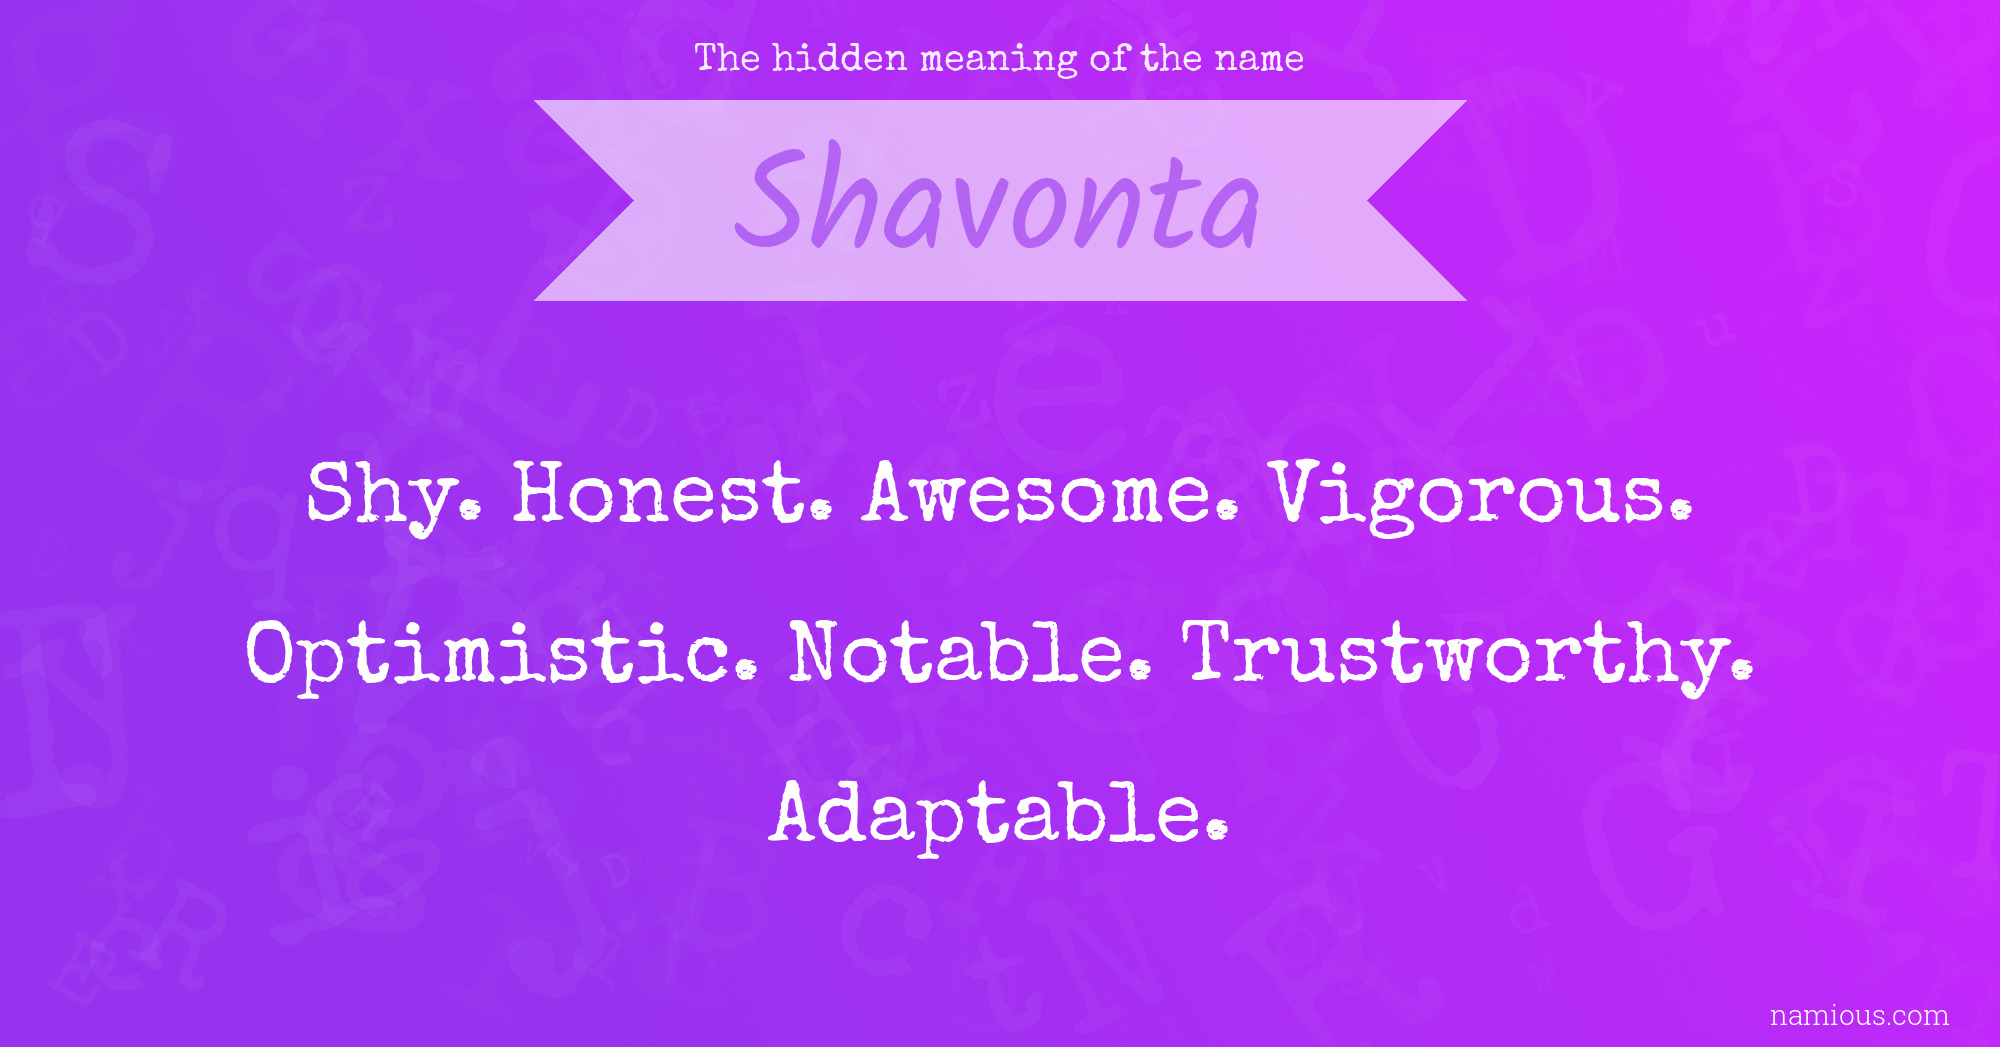 The hidden meaning of the name Shavonta